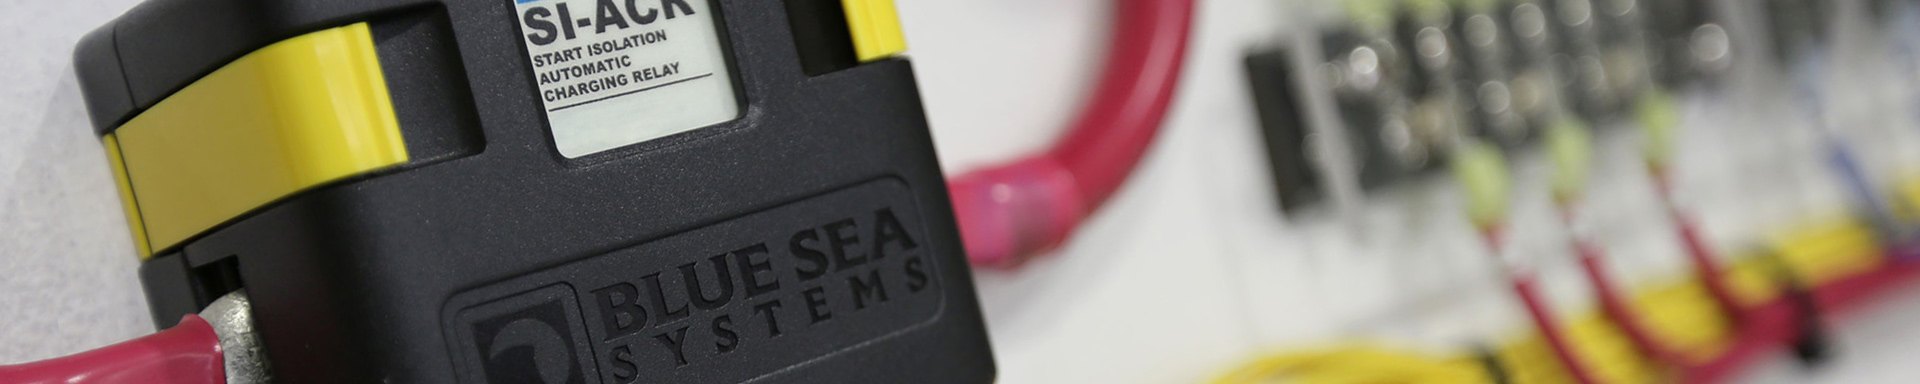 Blue Sea Systems Marine Electrical Distribution